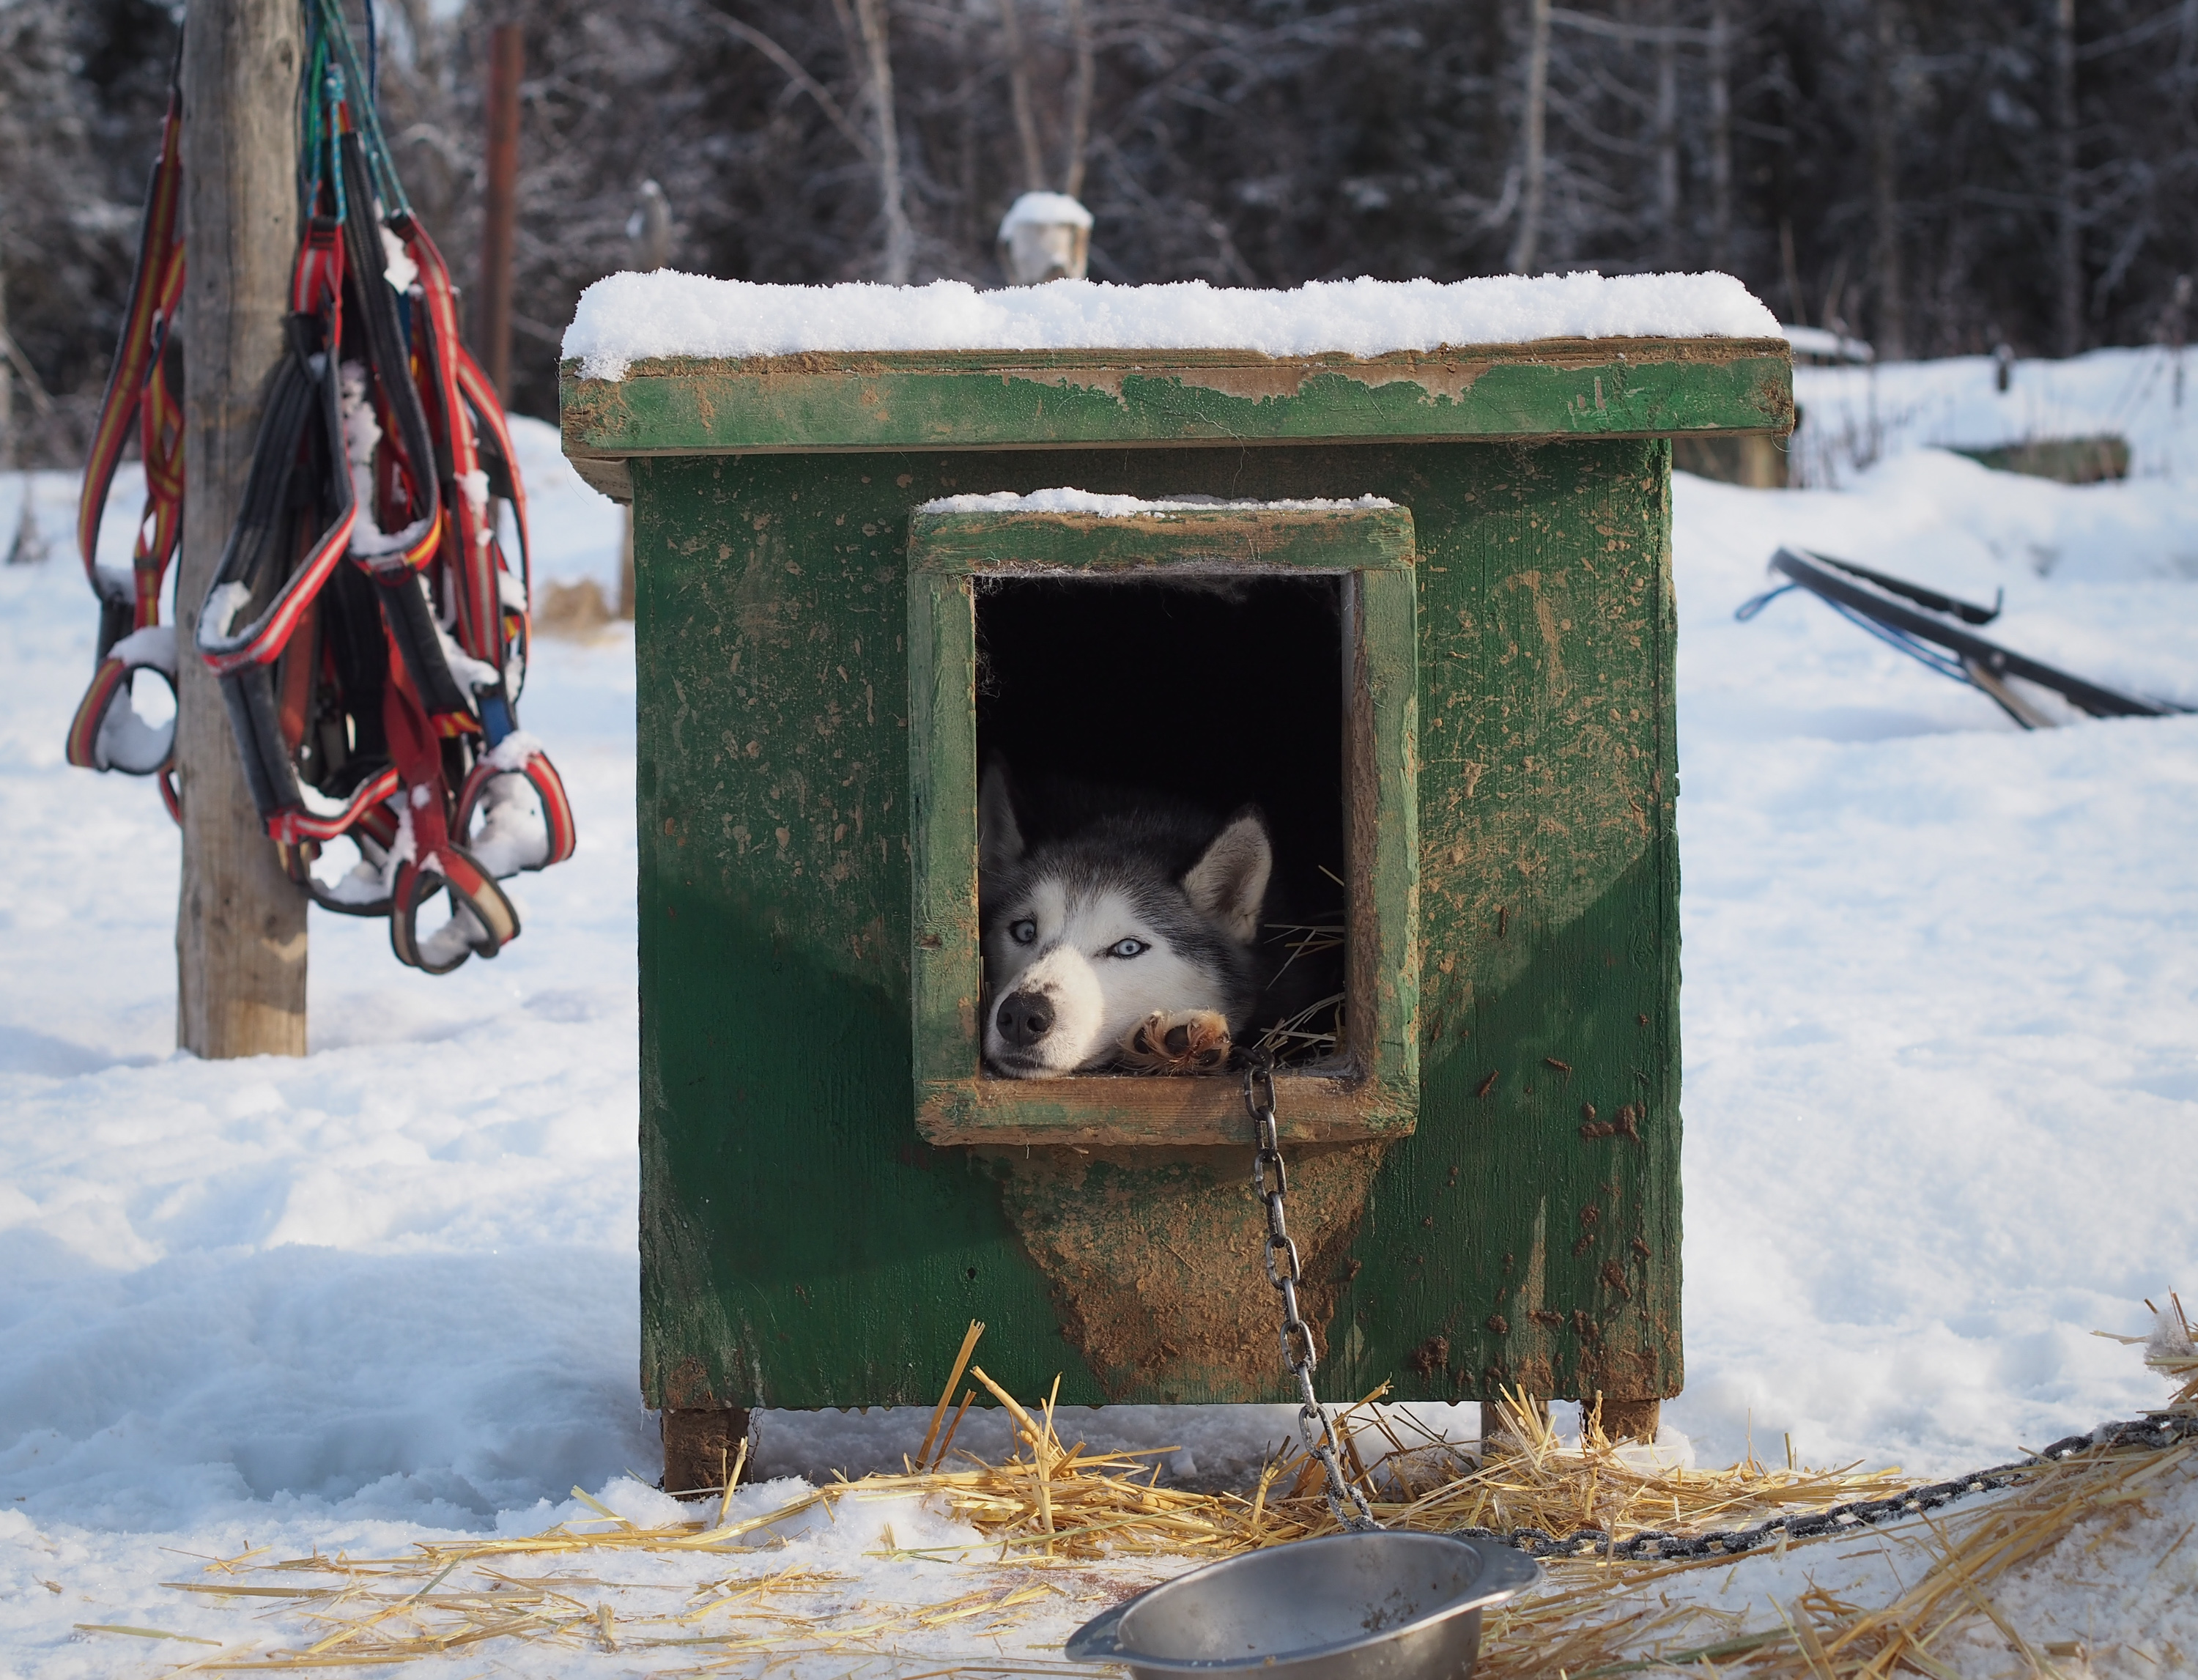 A Siberian husky rests at a well-maintained kennel in Willow. (Photo by Zachariah Hughes/Alaska Public Media)